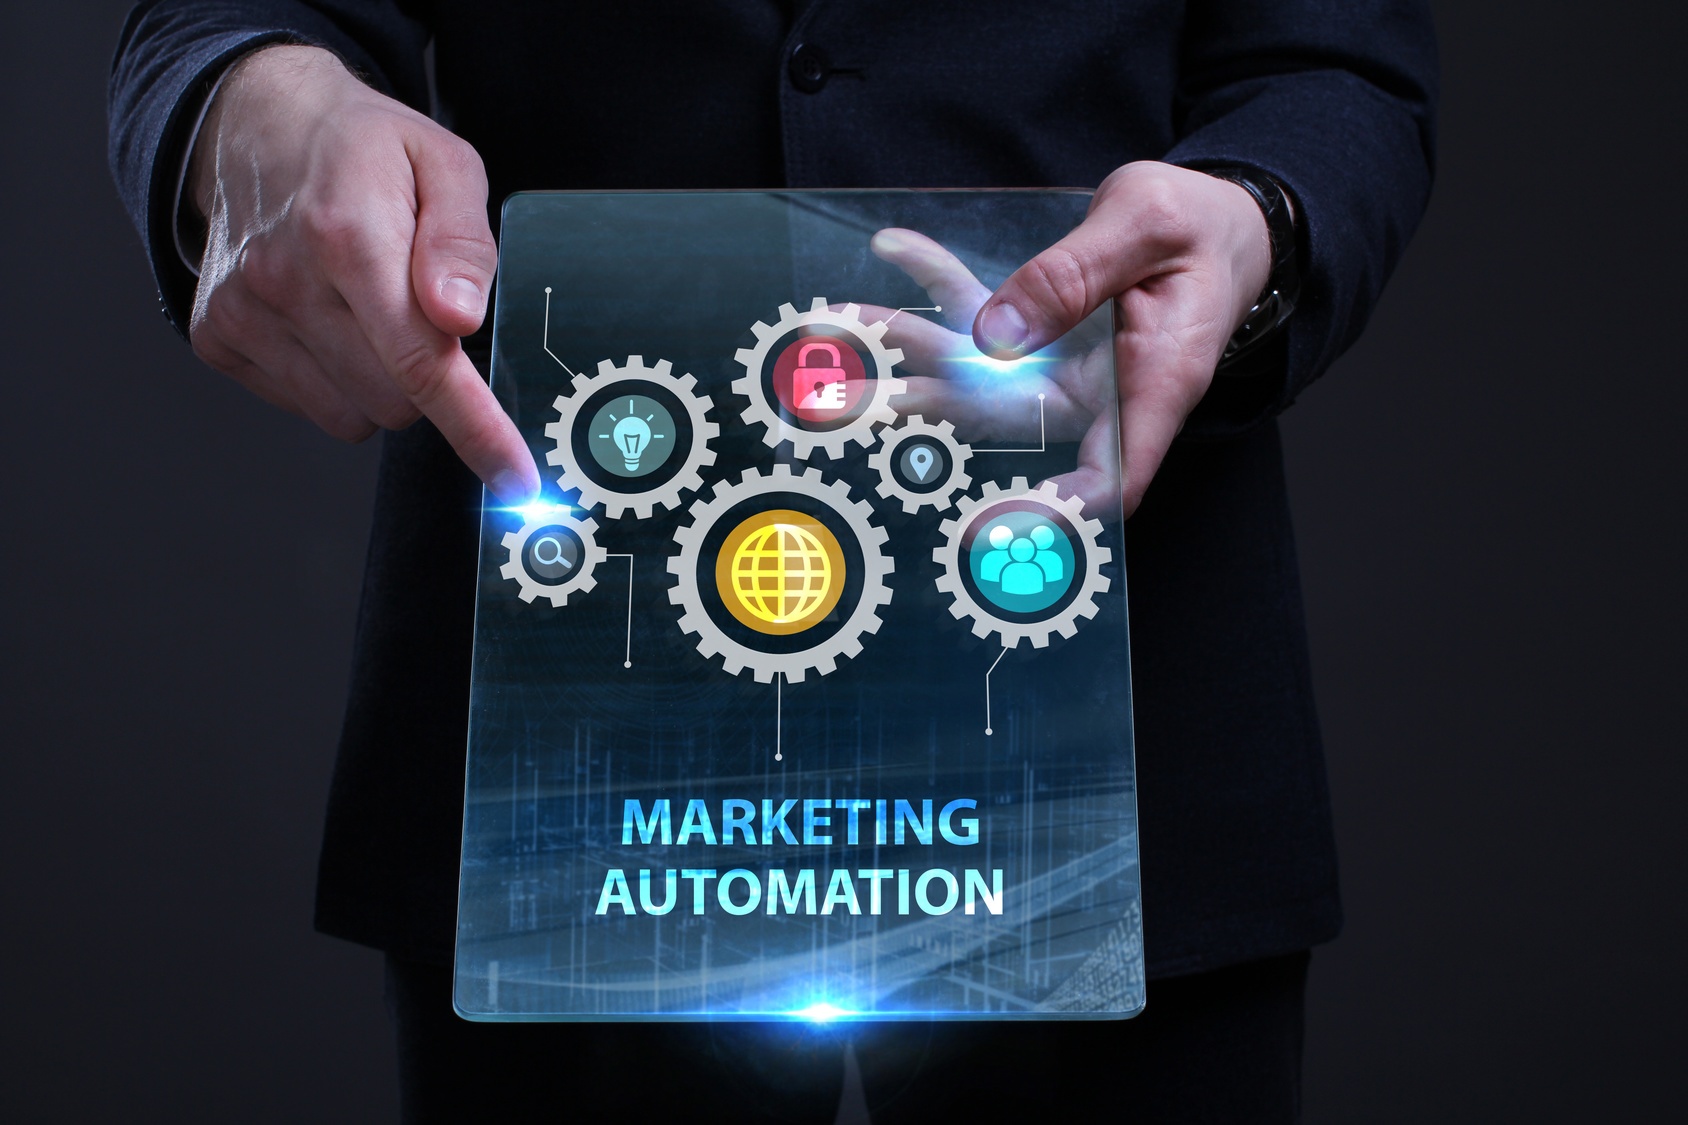 Digital Marketing Automation: How To Leverage Machine Learning